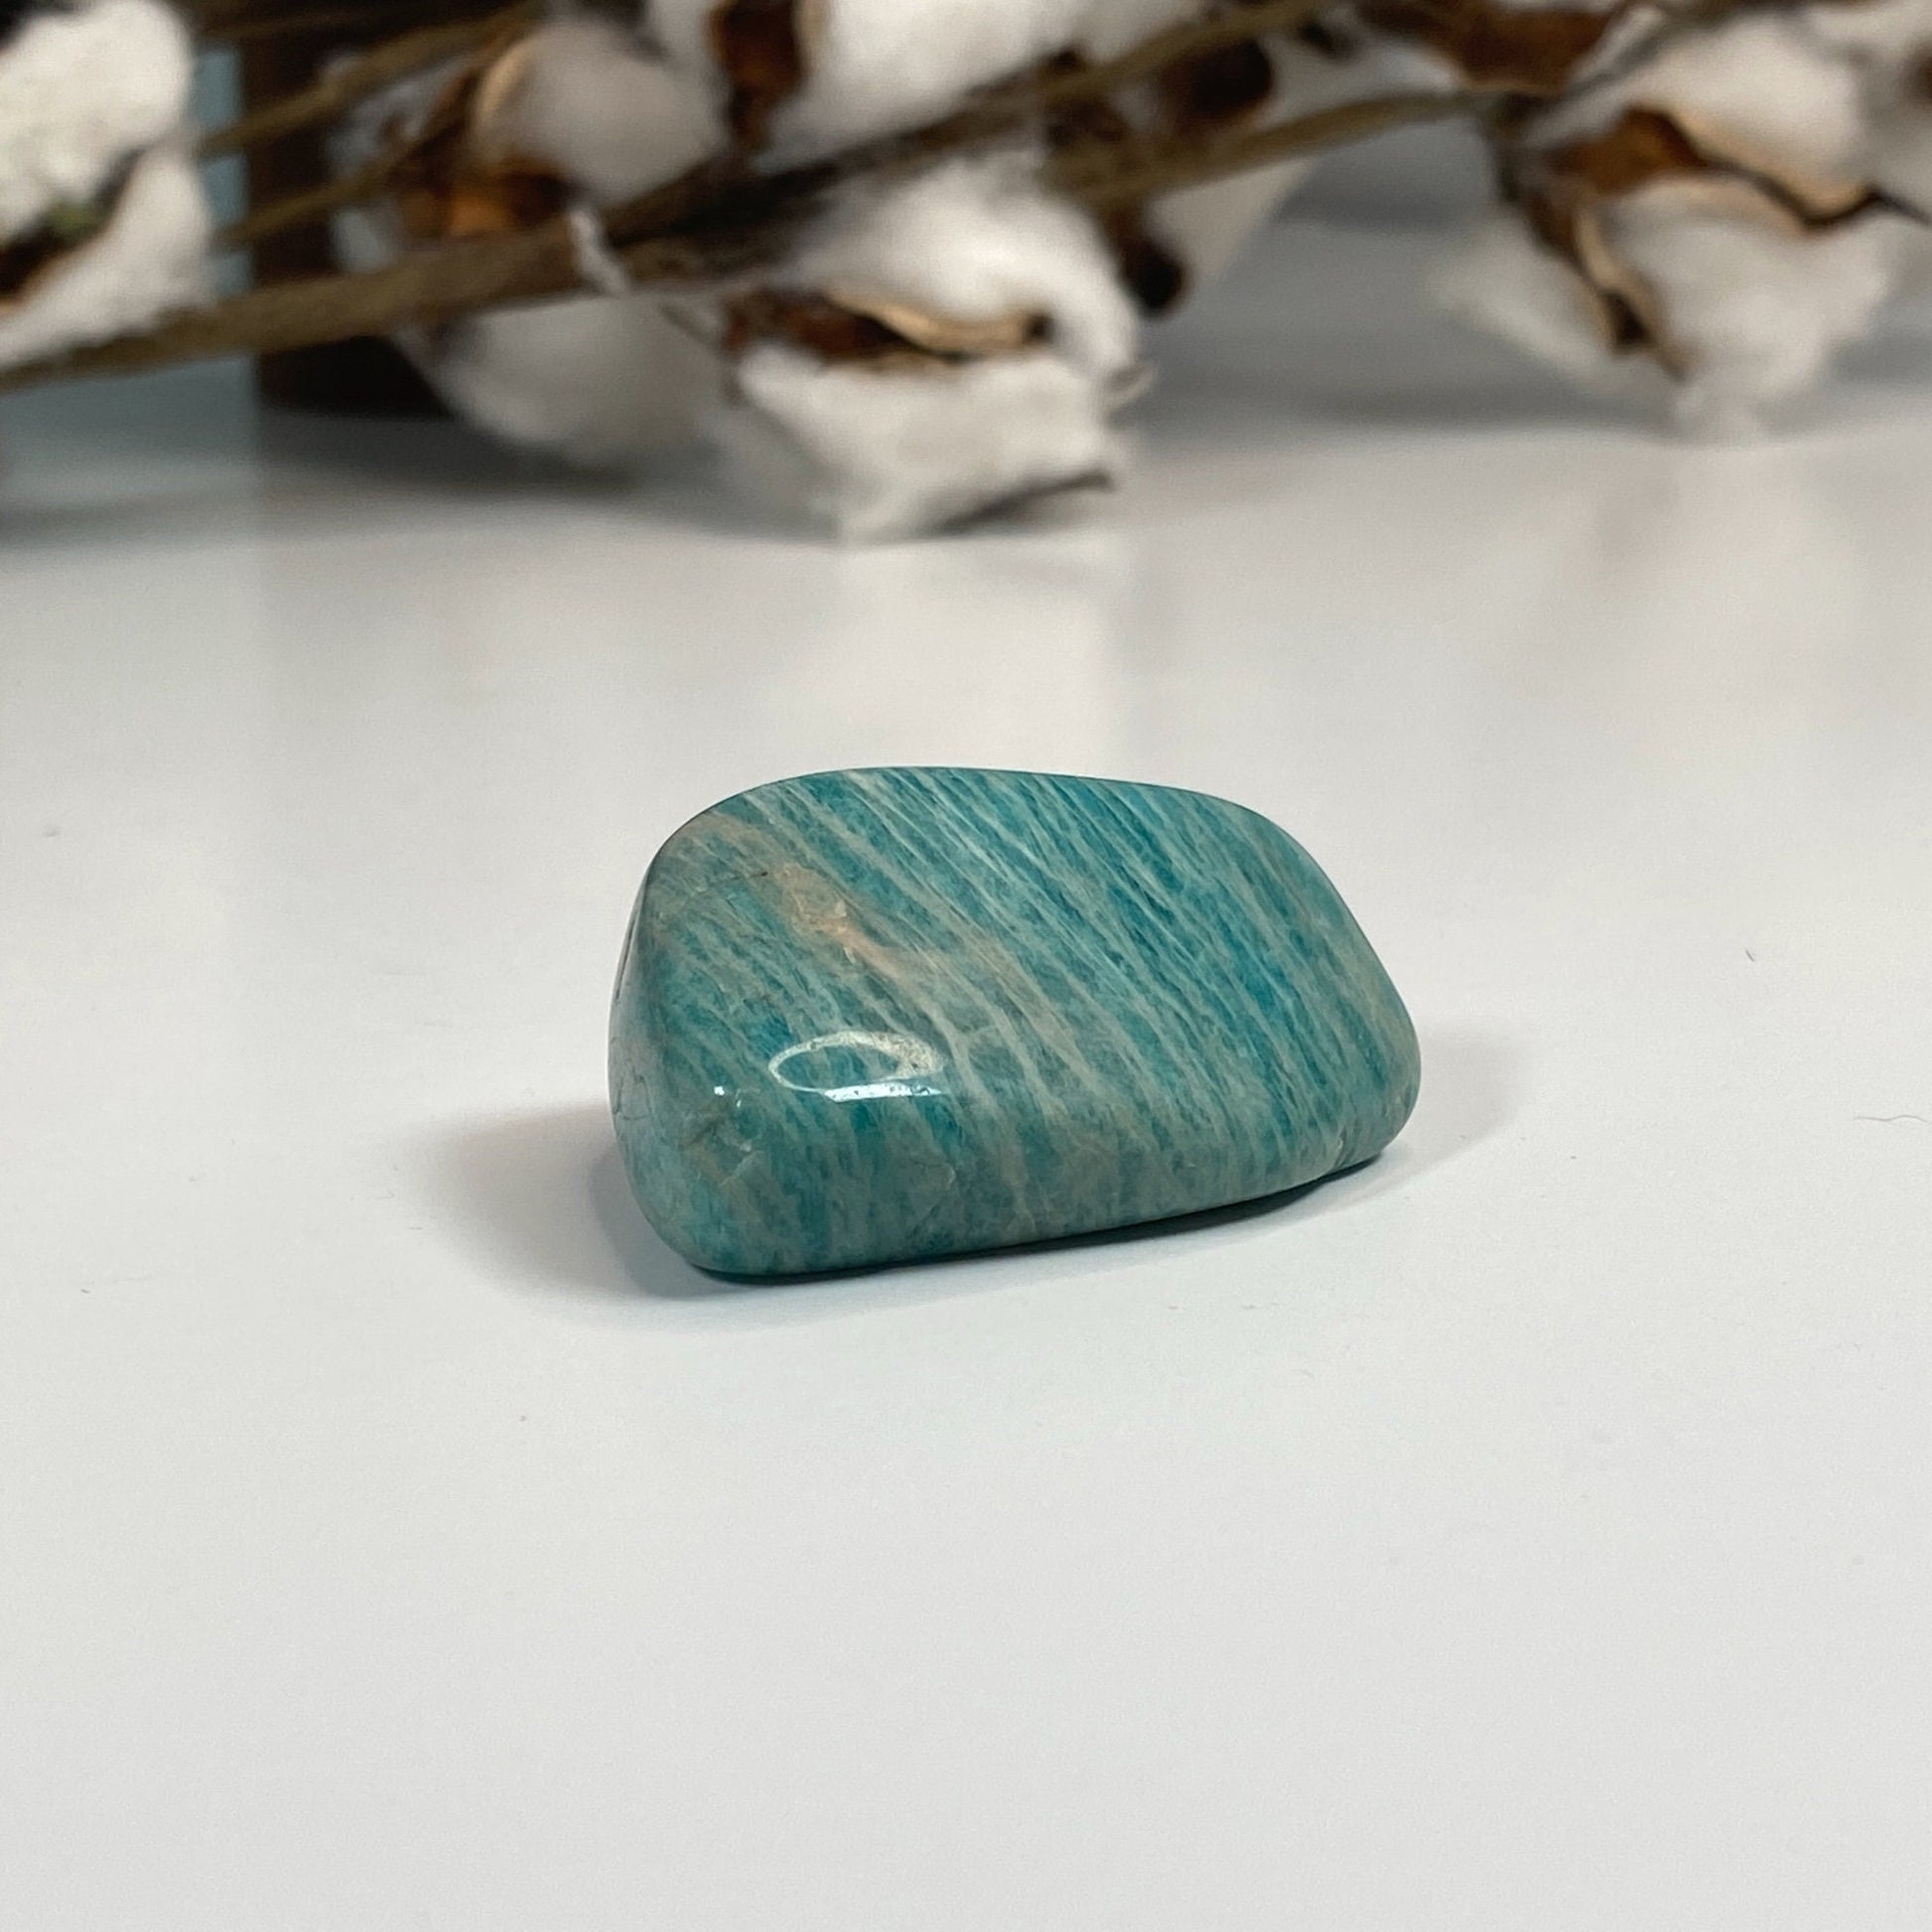 Natural Amazonite Crystal - Green Tumbled Stone - Courage and Protection Crystals - genuine healing stones for heart and throat chakra